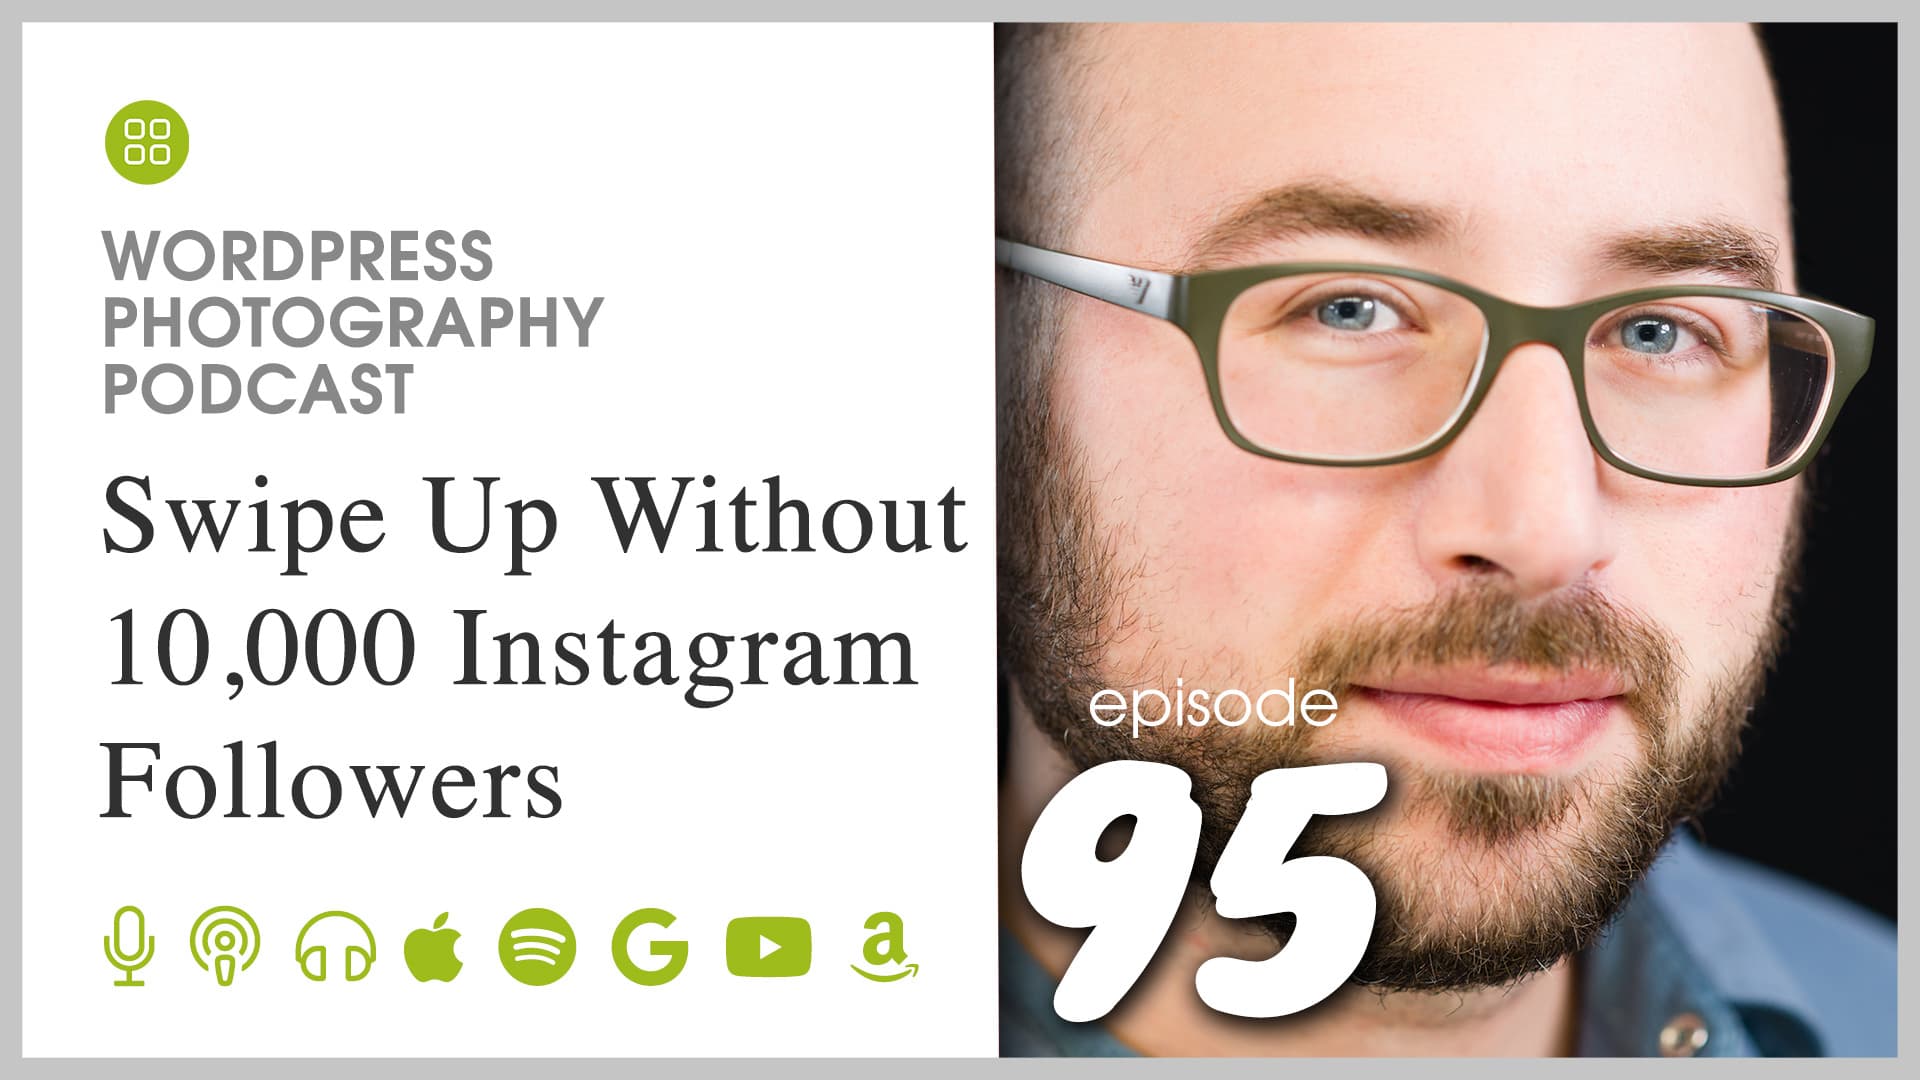 Episode 95 – Swipe Up Without 10,000 Instagram Followers